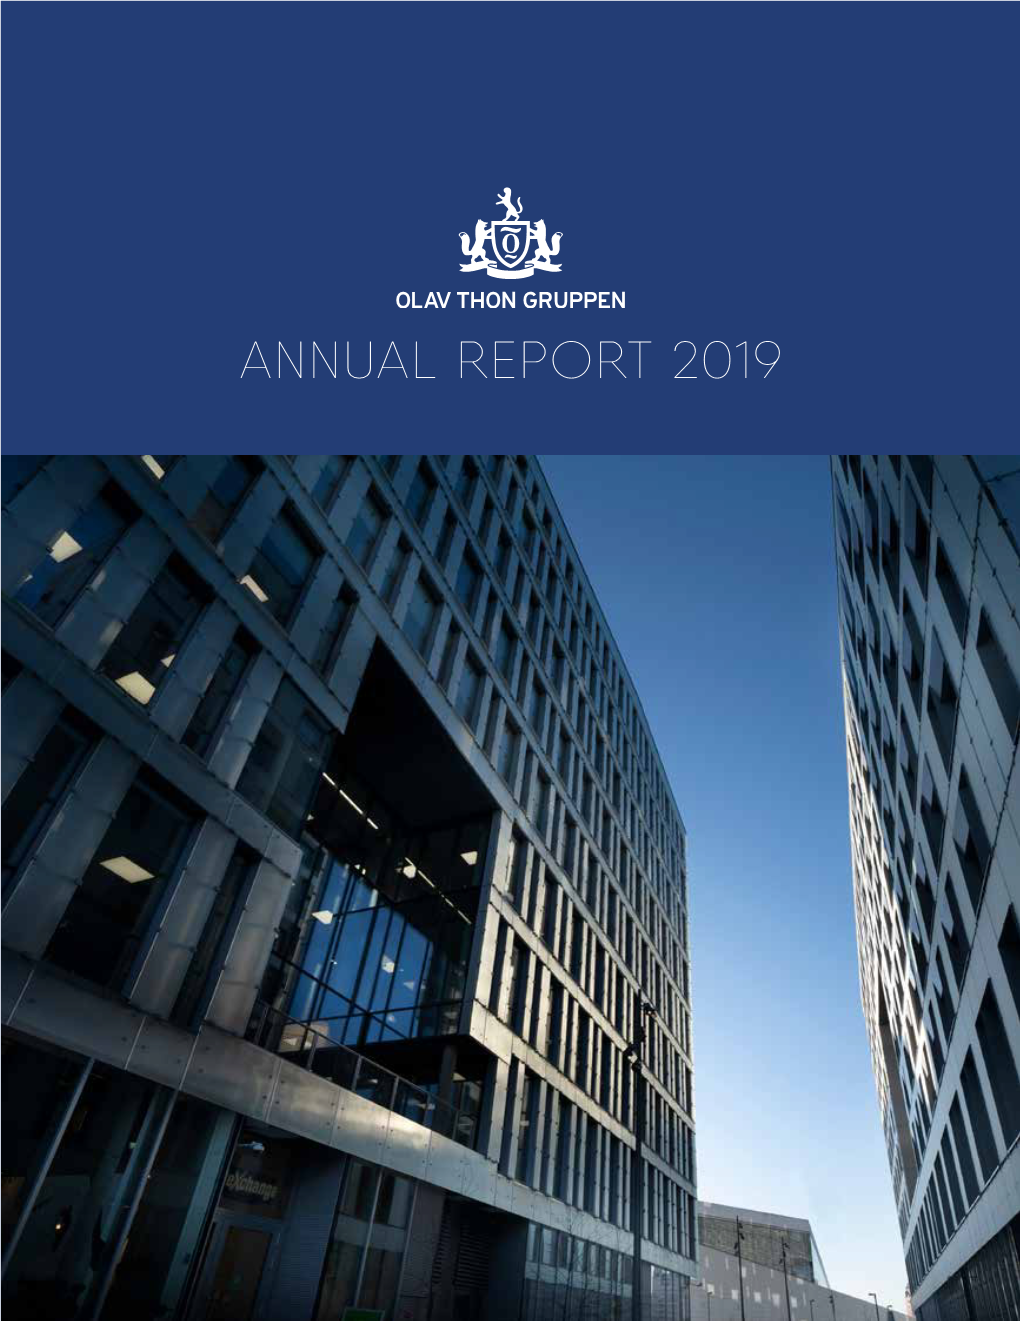 Annual Report 2019 the Olav Thon Group